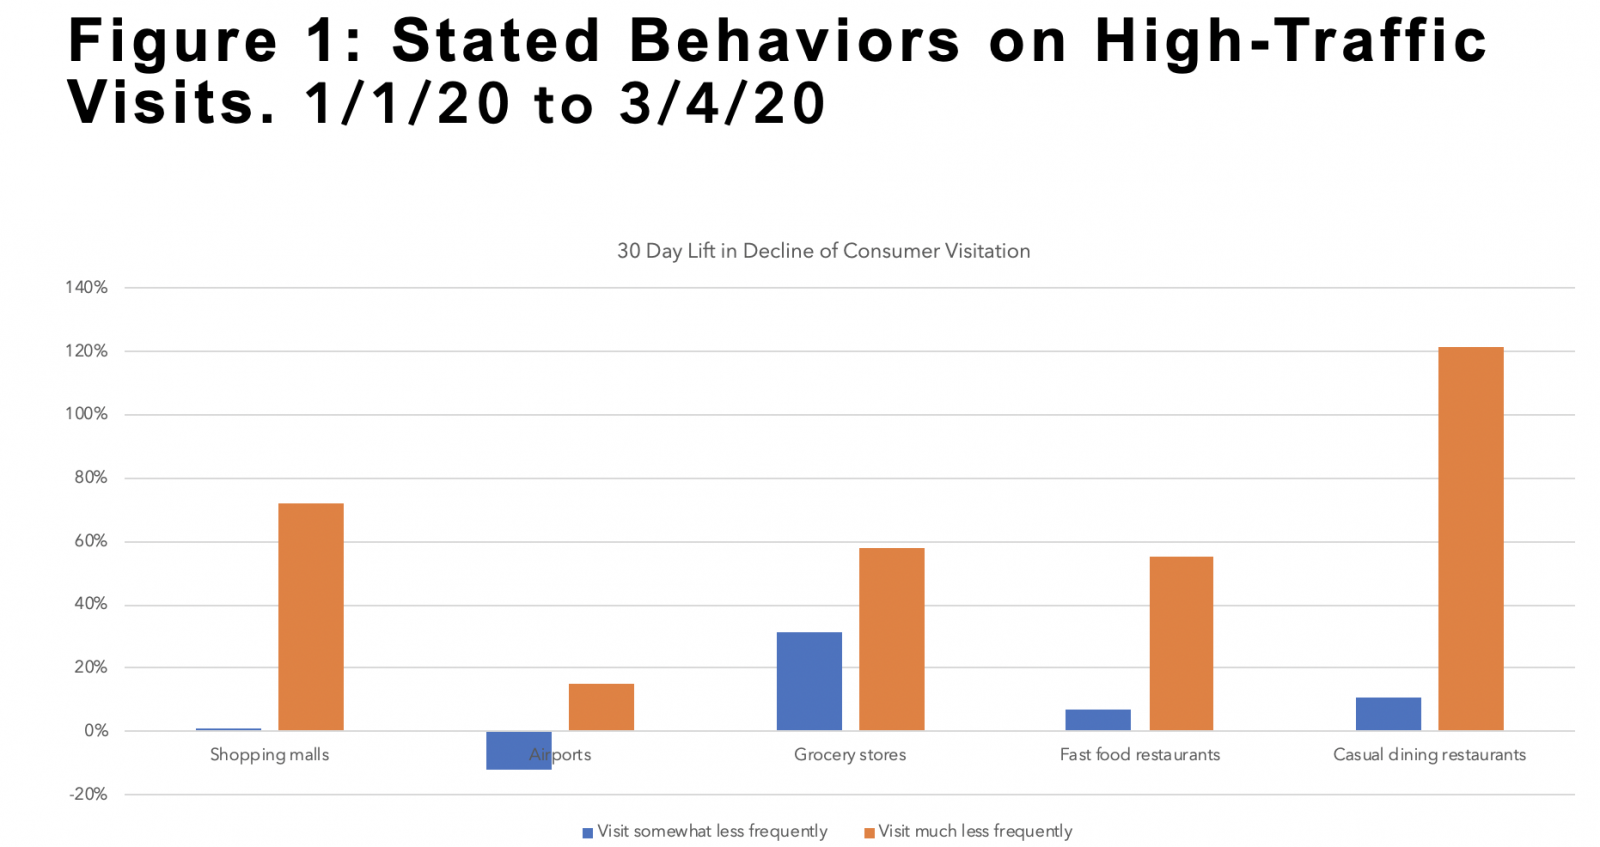 Stated Behaviors on High-Traffic Visits.